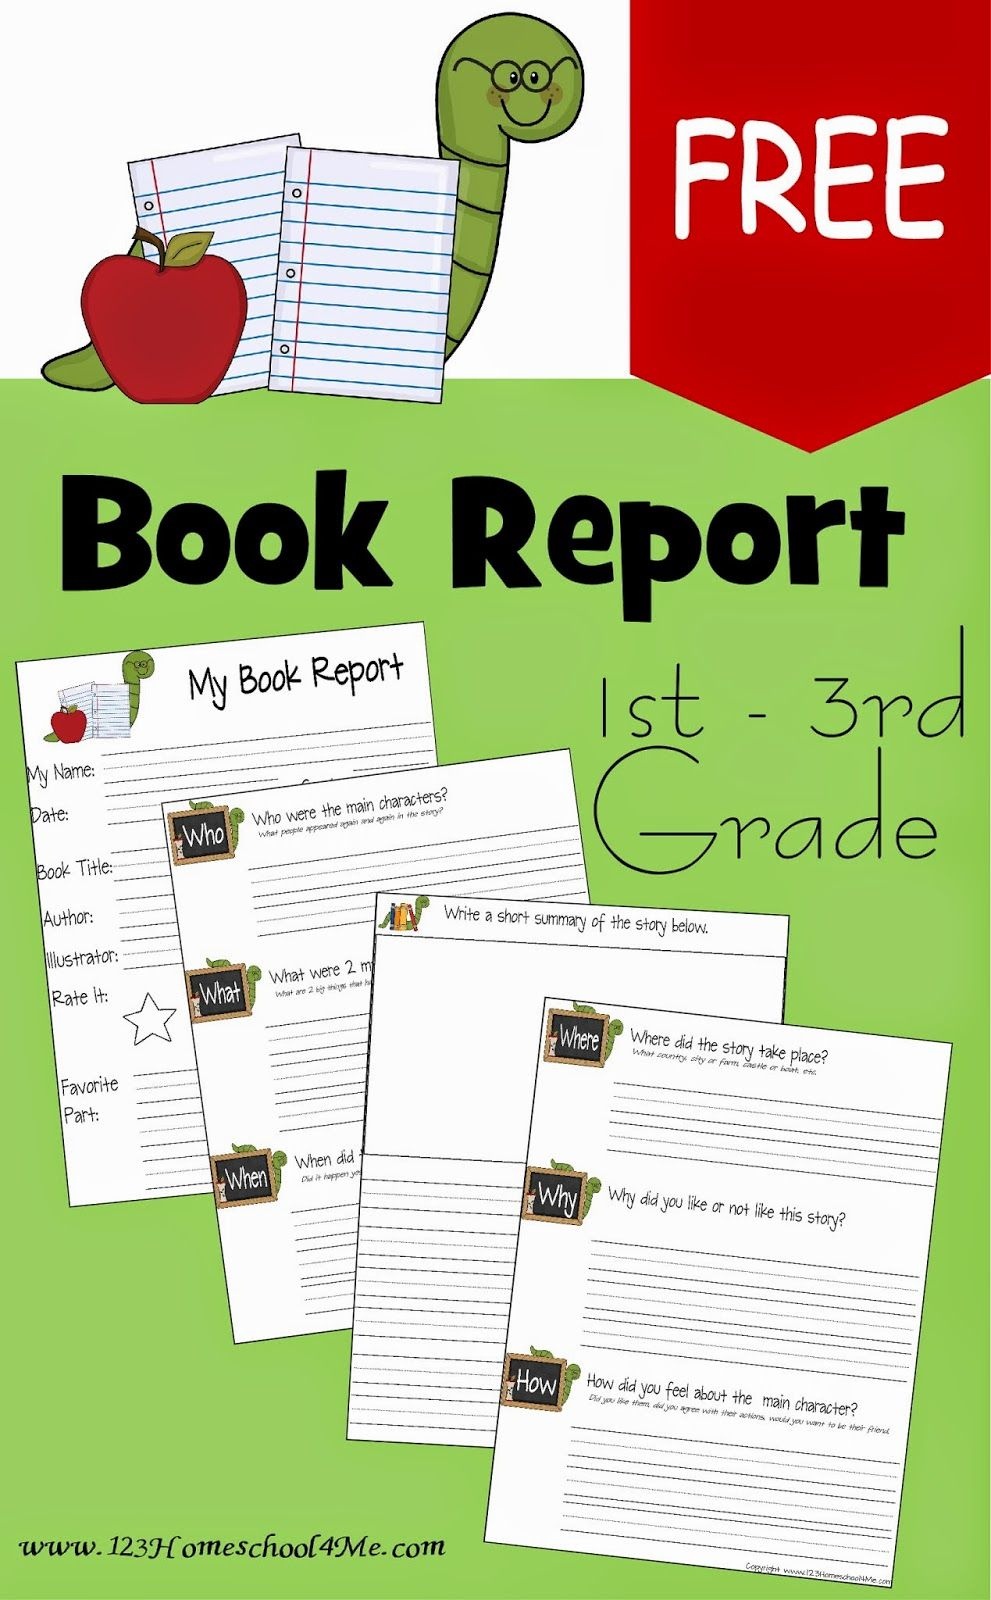 Free Book Report Template | Play Activities For Kids | 1St Grade - Free Printable Book Report Forms